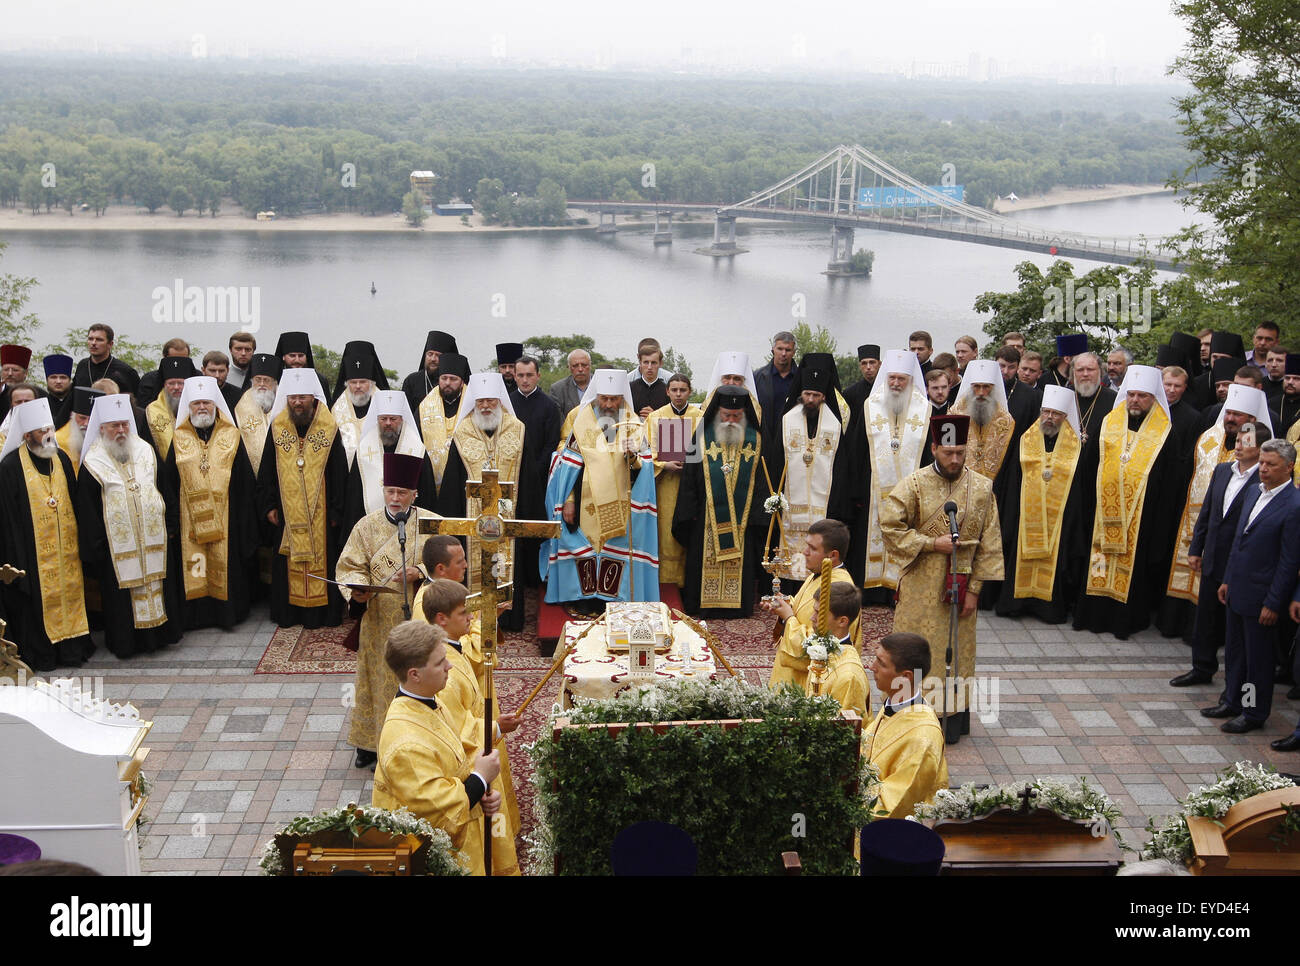 Kiev, Ukraine. 27th July, 2015. Priests from the Ukrainian Orthodox Church of Moscow Patriarchate in a prayer service marking the 1000th anniversary of the Repose of Vladimir the Great at St. Vladimirs Hill in Kiev, Ukraine, 27 July 2015. The Grand Prince of Kiev, Vladimir the Great, also known as St. Vladimir, Vladimir the Baptizer of Rus and Vladimir the Red Sun, was the first Christian ruler in the Kievan Rus who christianized the region. Orthodox believers will mark the 1027th anniversary of Kievan Rus Christianization on 28 July. © Serg Glovny/ZUMA Wire/Alamy Live News Stock Photo